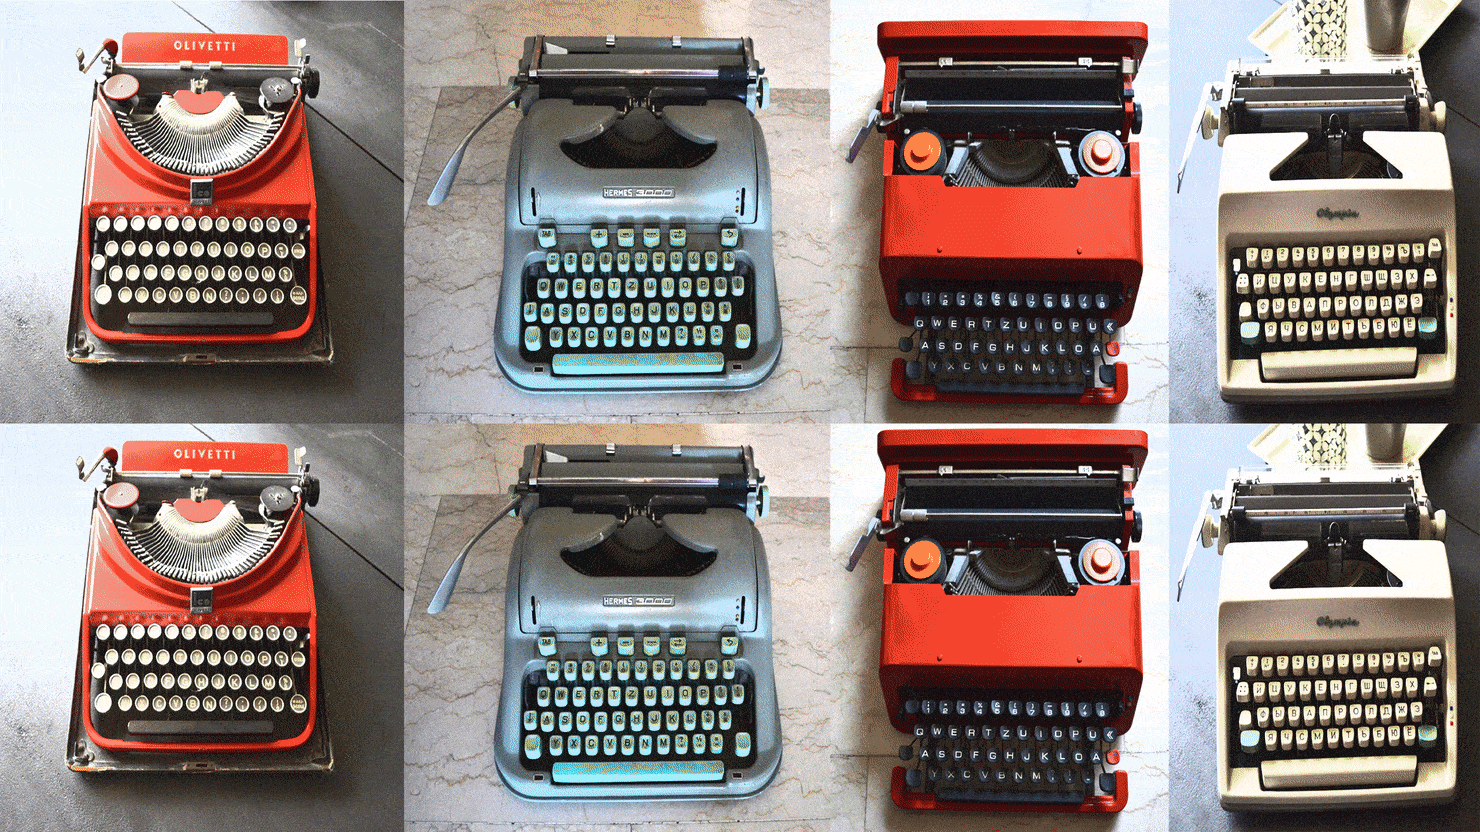 Confessions of a Typewriter Collector